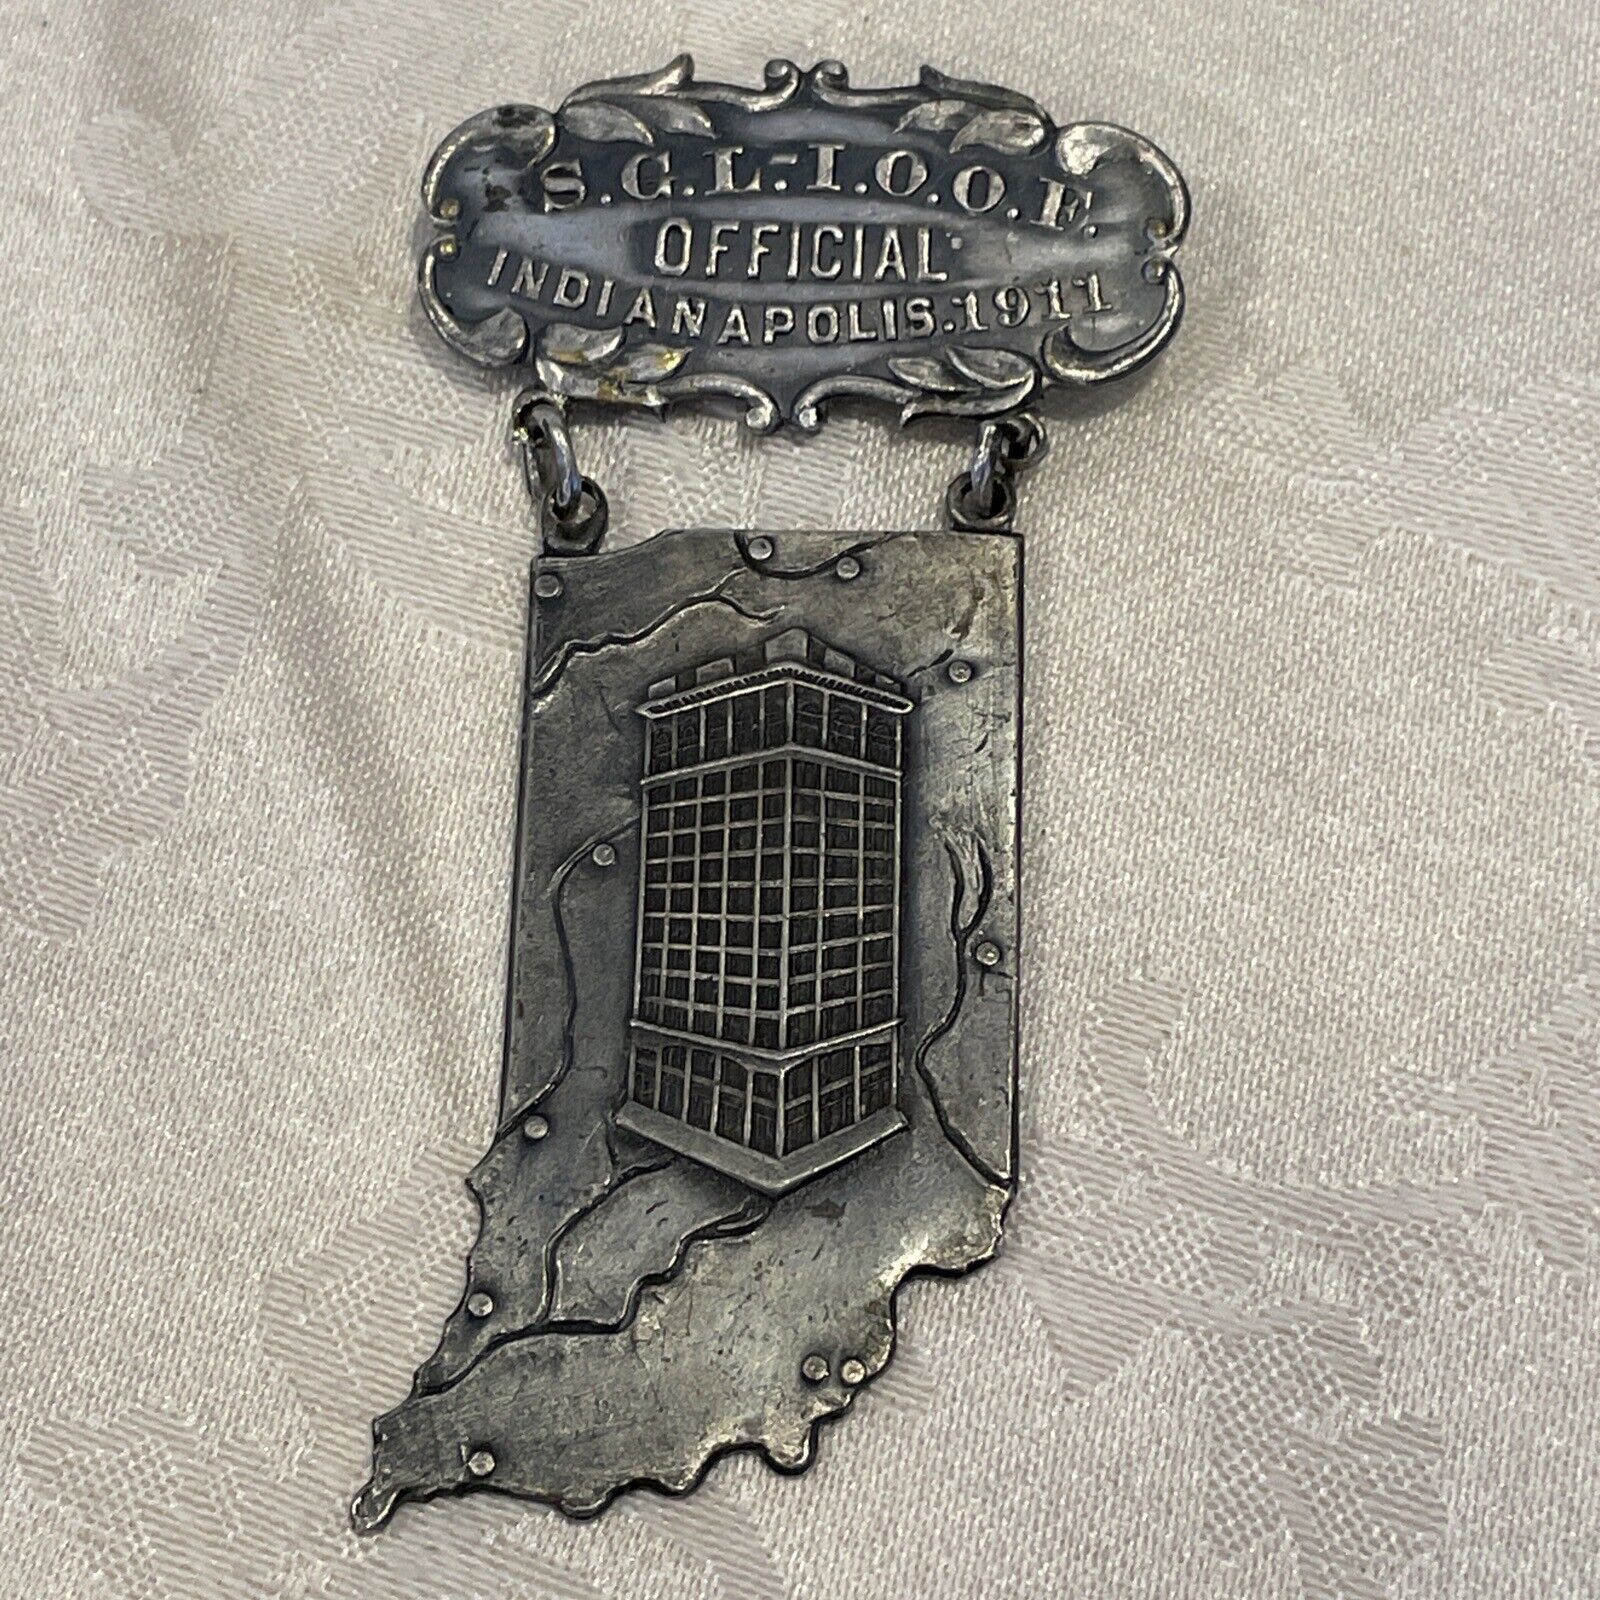 Antique S.G.L.-I.O.O.F 1911 Odd Fellows Official Badge Indianapolis IN Exc Cond 